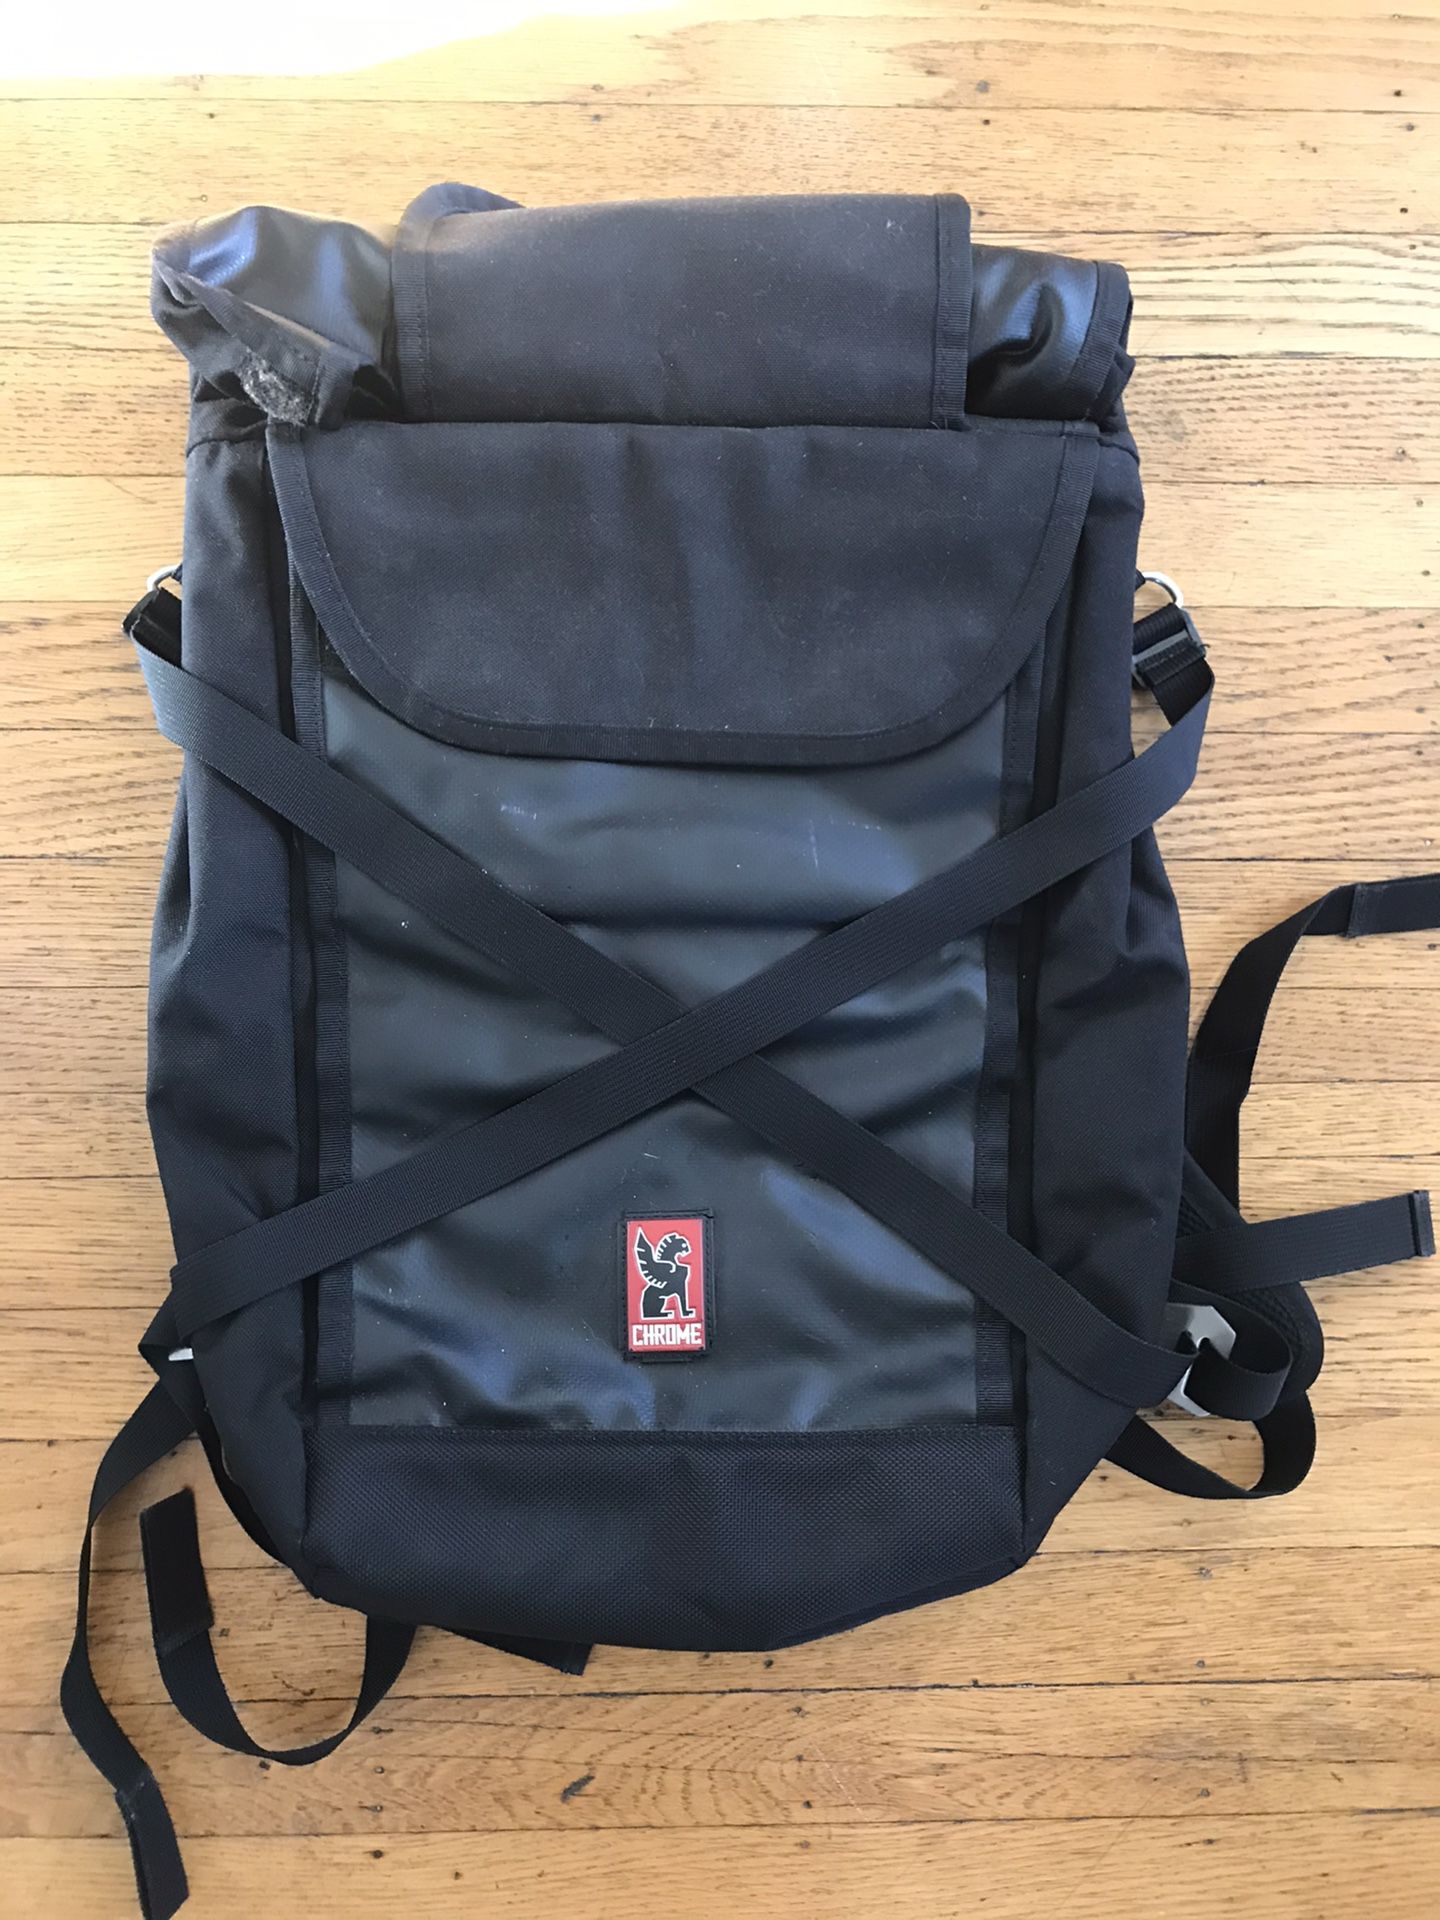 Chrome Industries backpack